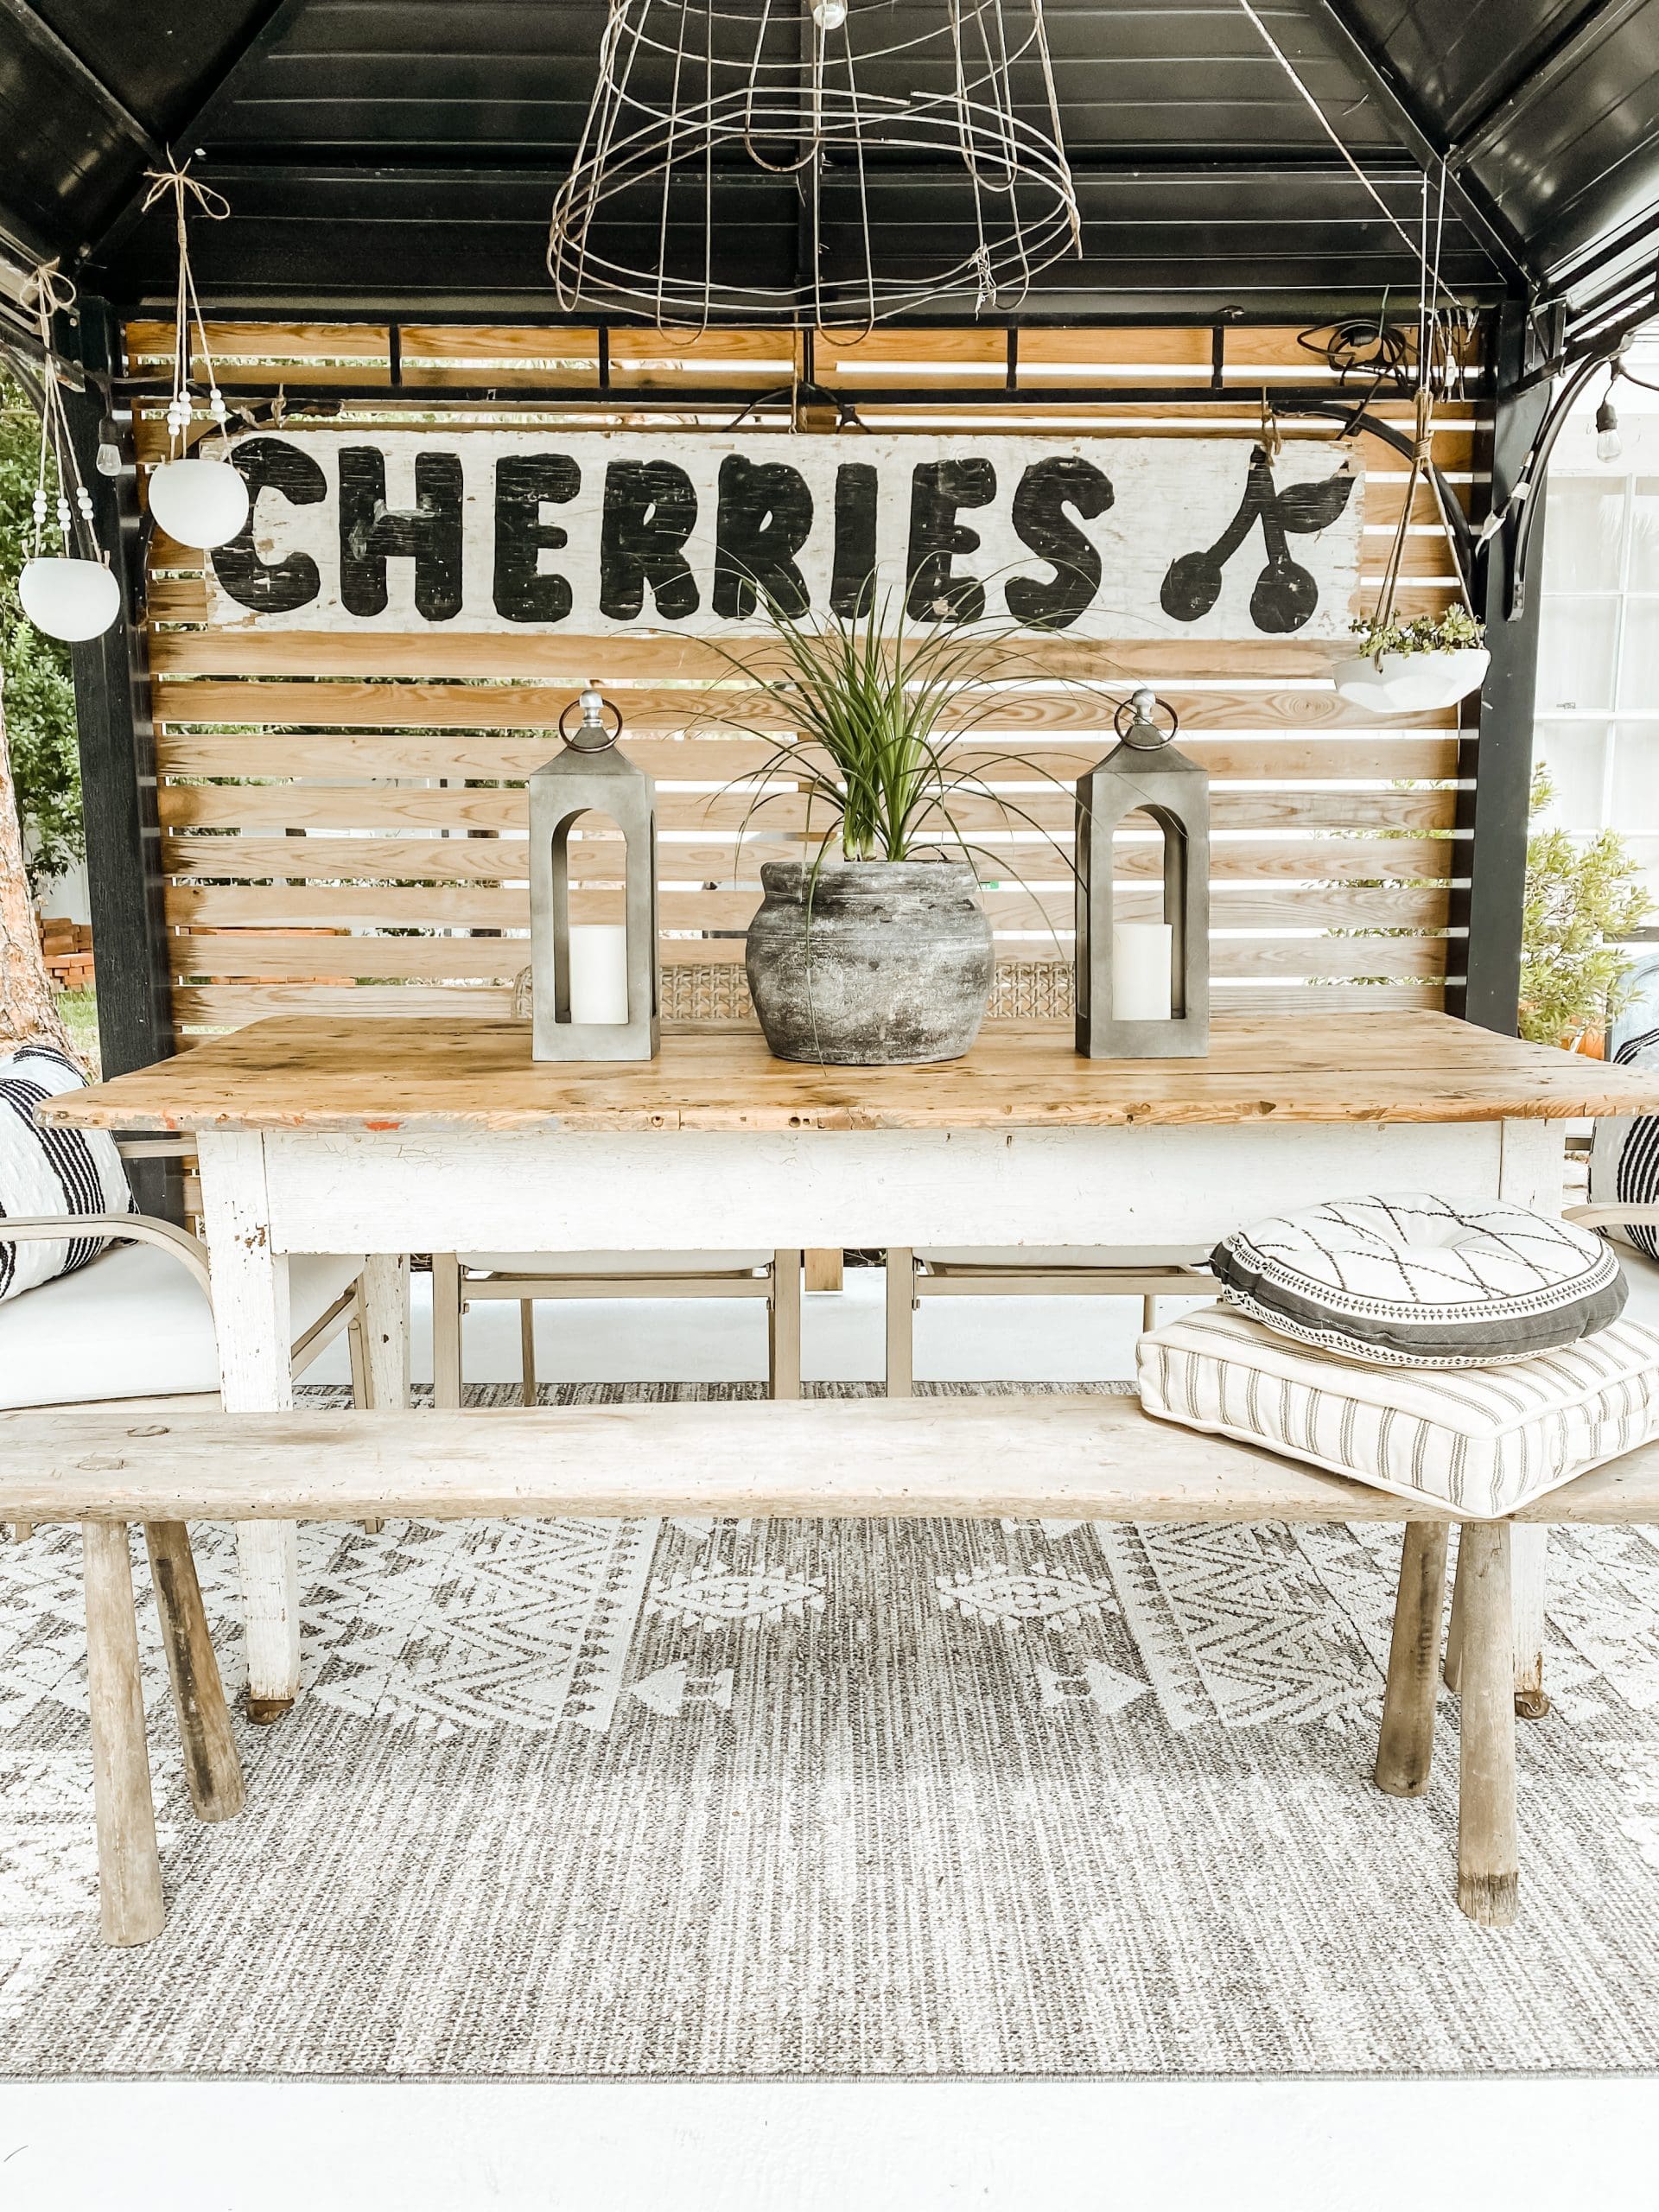 A rustic outdoor dining setup featuring multiple dishes and